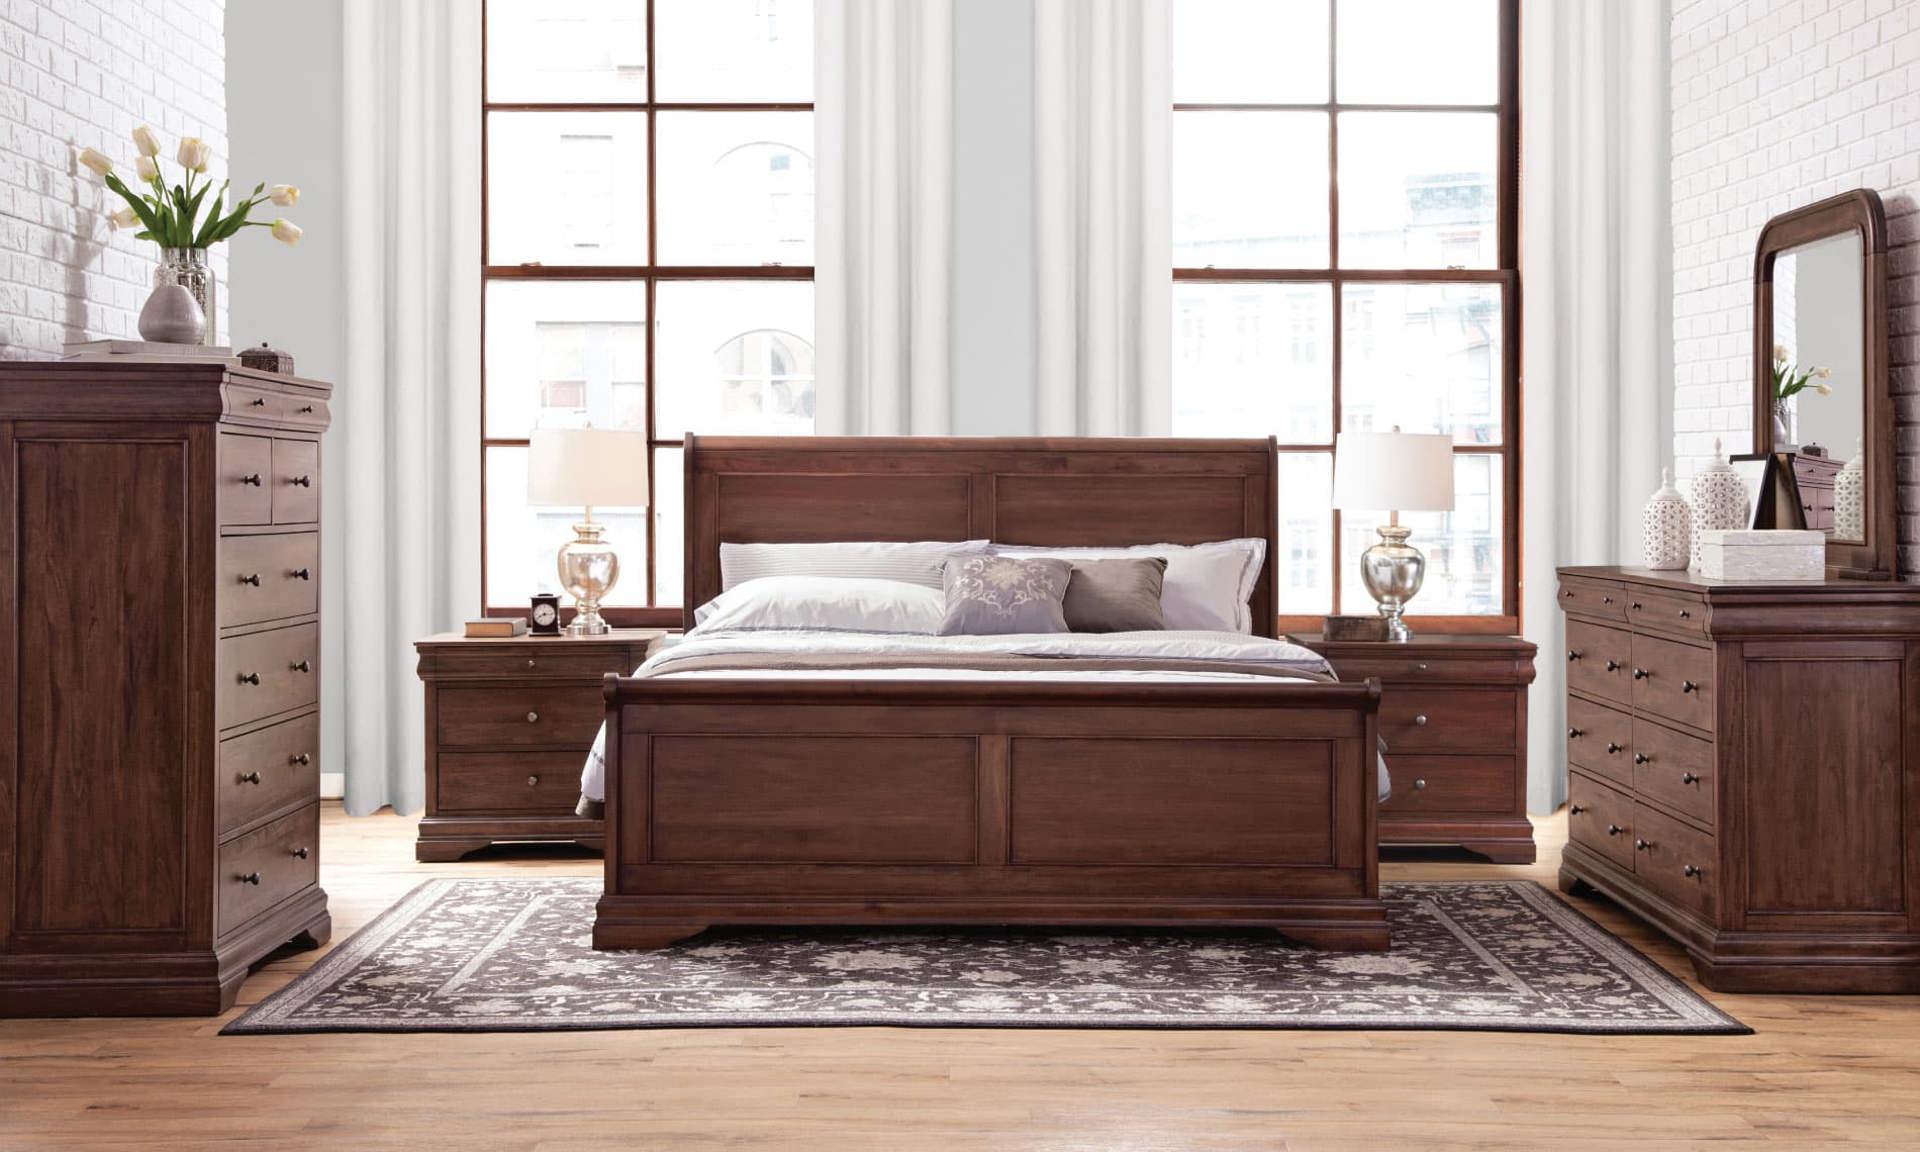 Classic mahogany bedroom sleigh set is a traditional design that has been handcrafted.